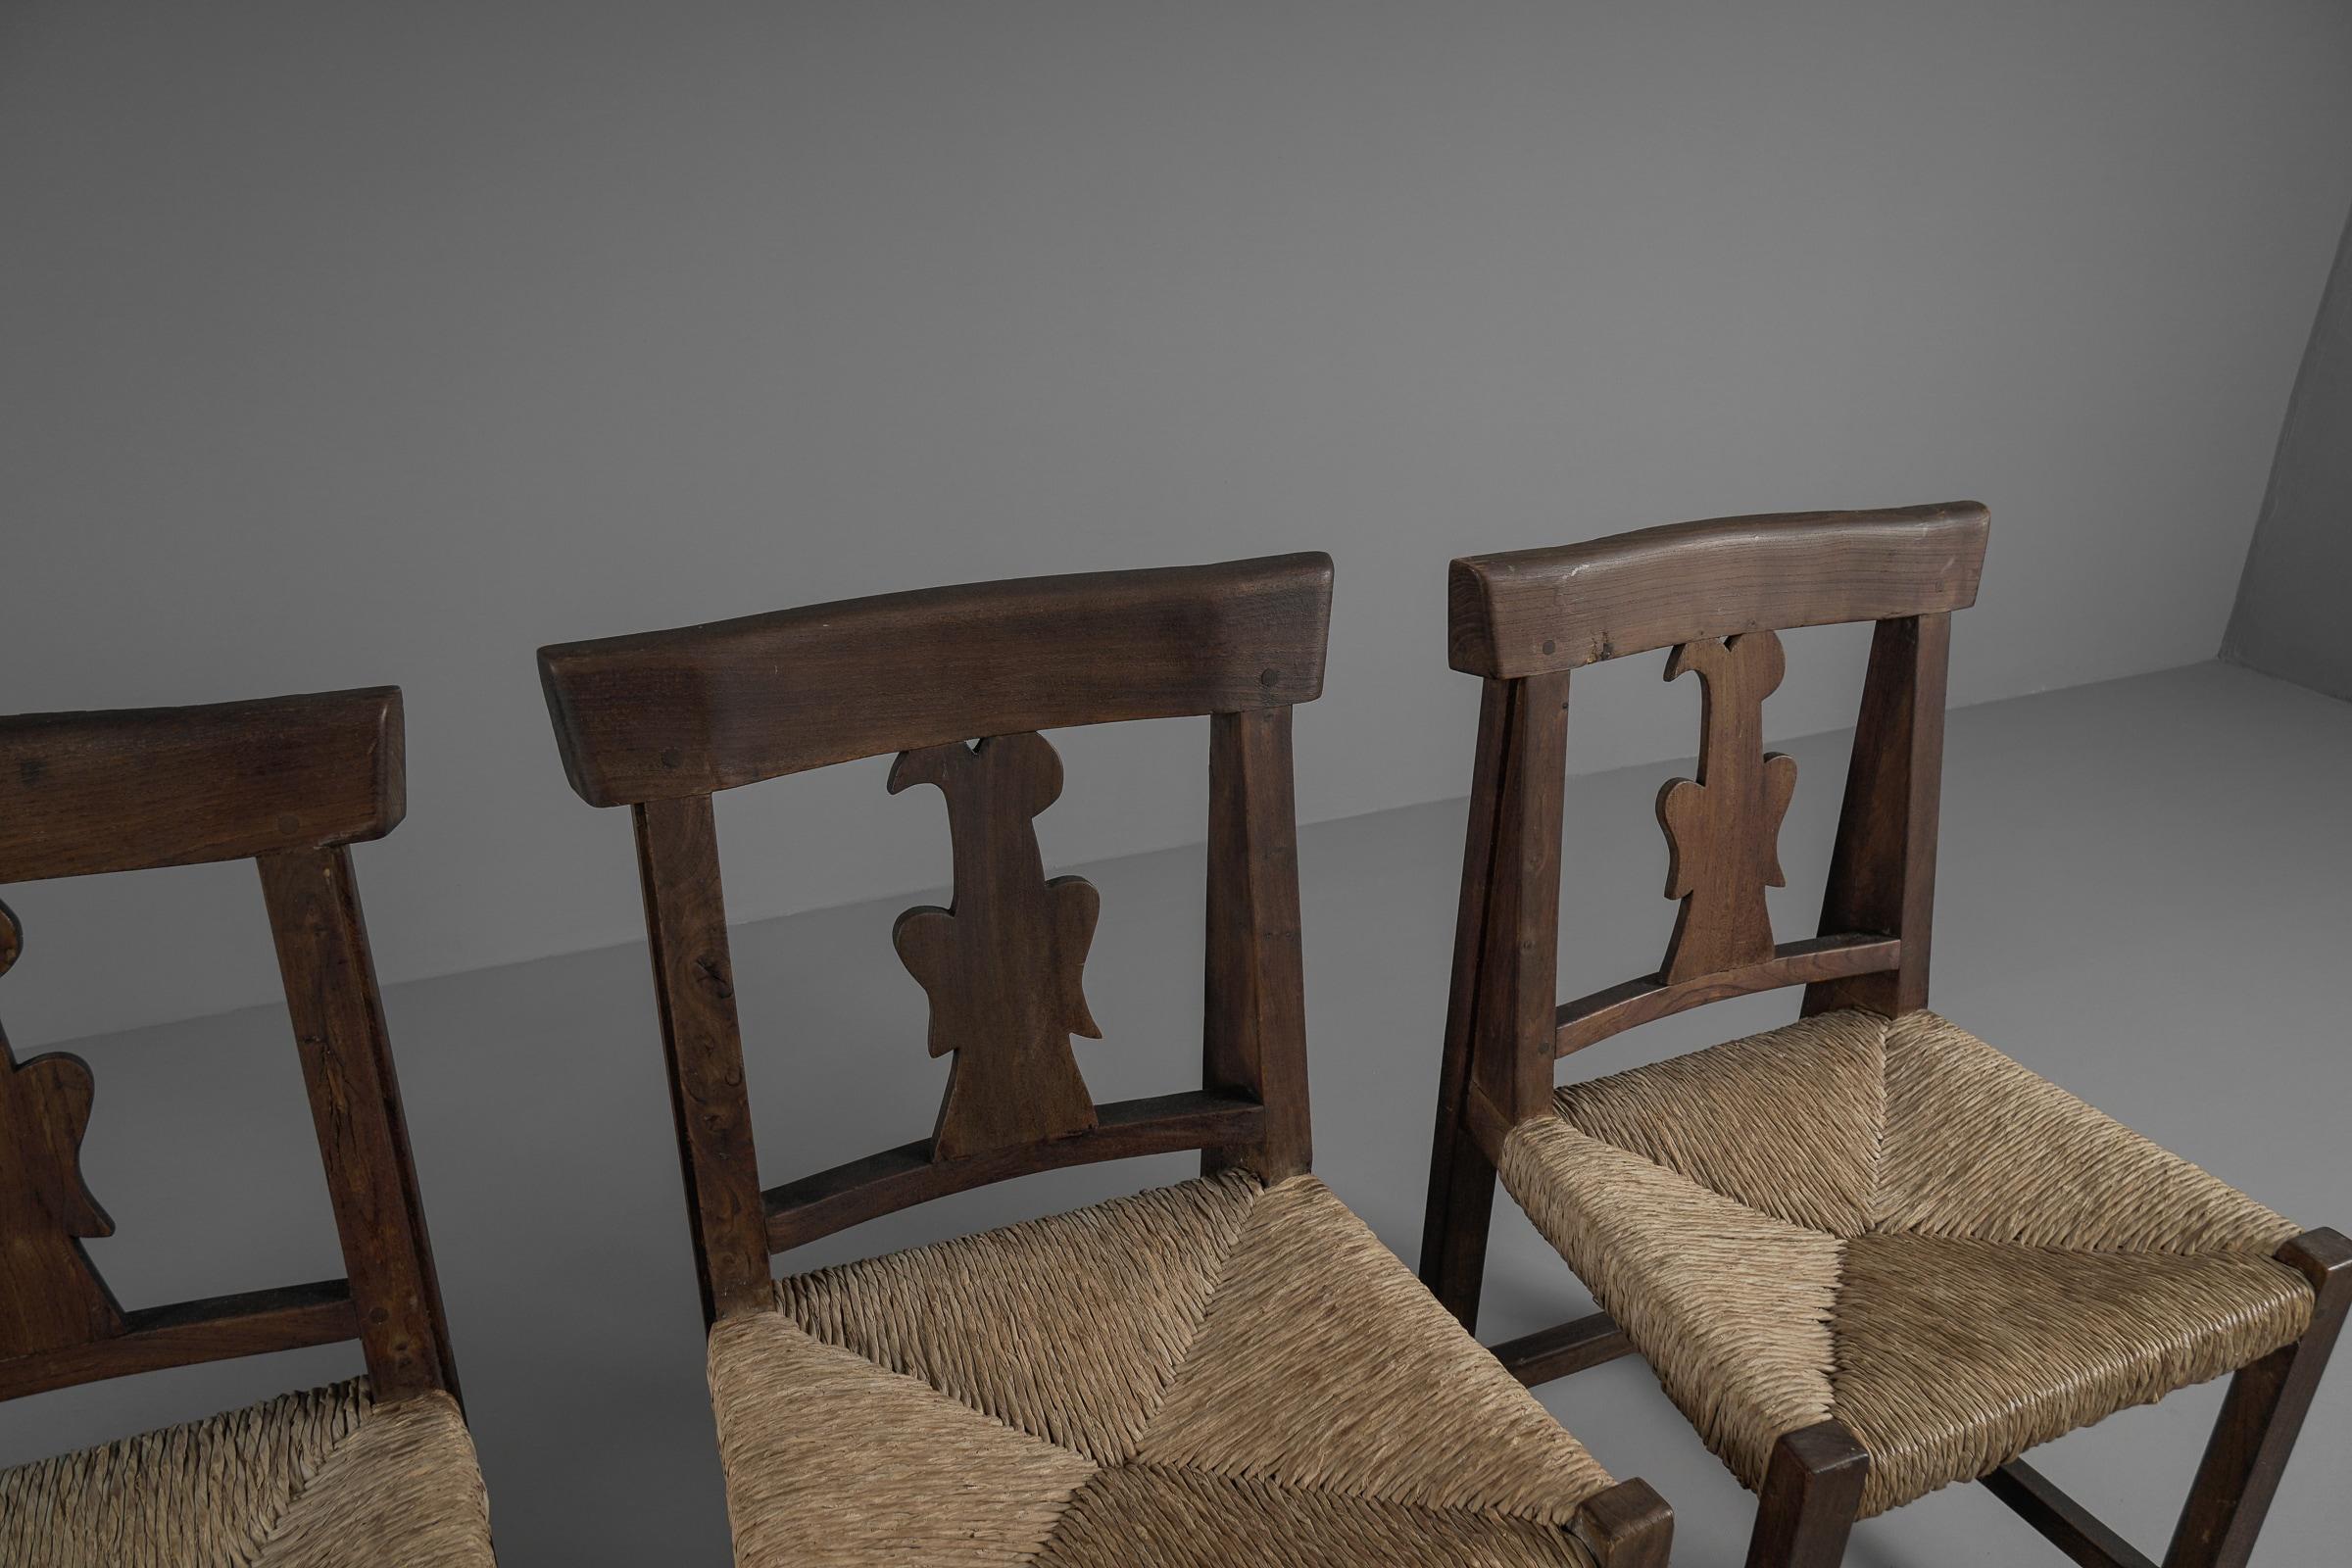 Set of 4 French Provincial Wood & Seagrass Chairs, 1960s Mid-Century Modern For Sale 15